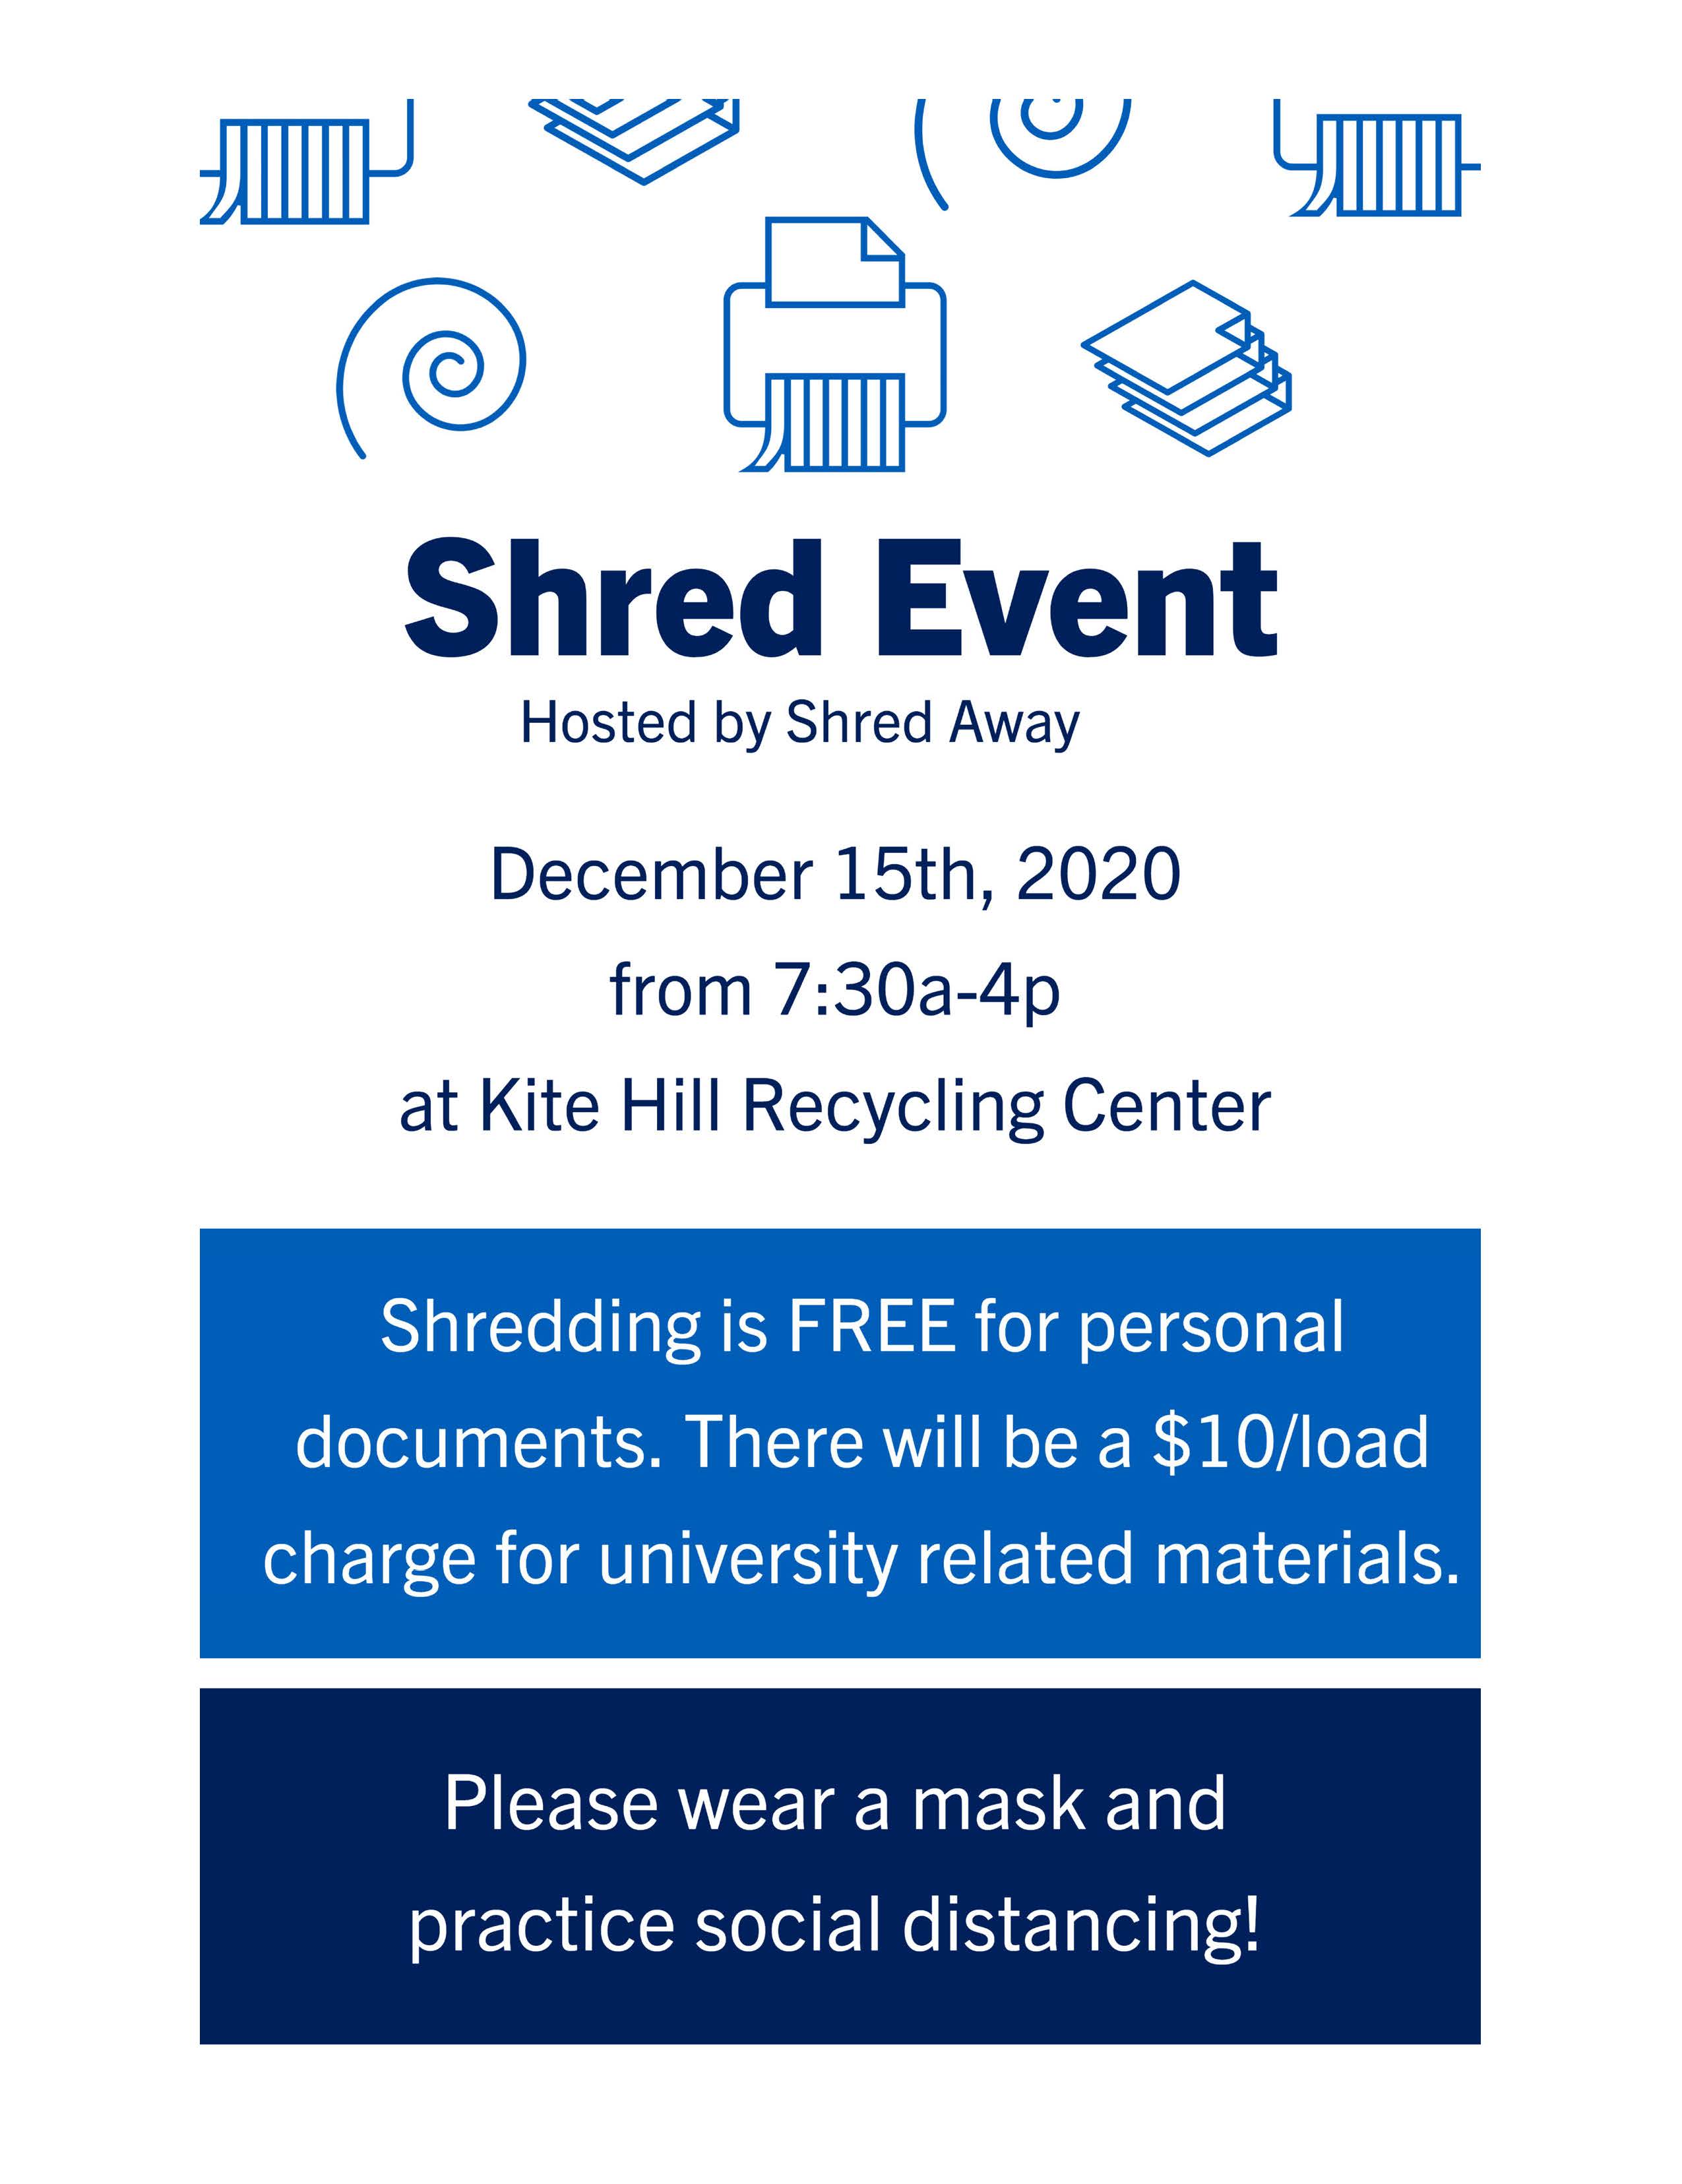 12-15-2020 7:30am to 4pm Shred Event at Kite Hill Recycling Center